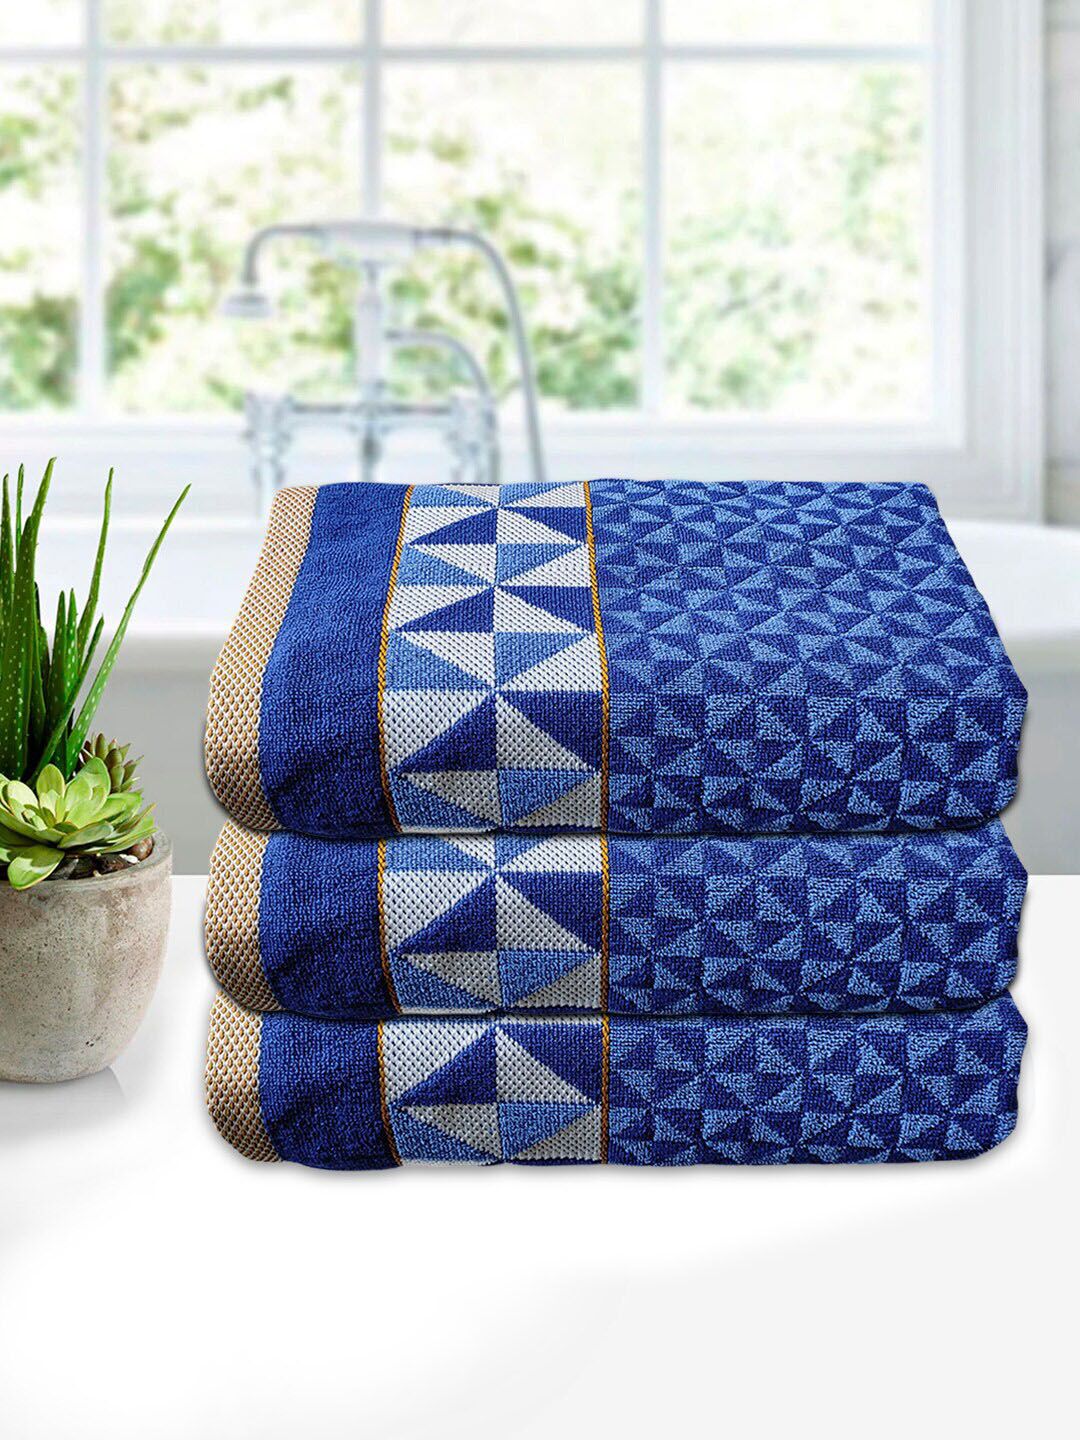 Kuber Industries Unisex Set Of 3 Blue Printed Cotton 400 GSM Bath Towels Price in India